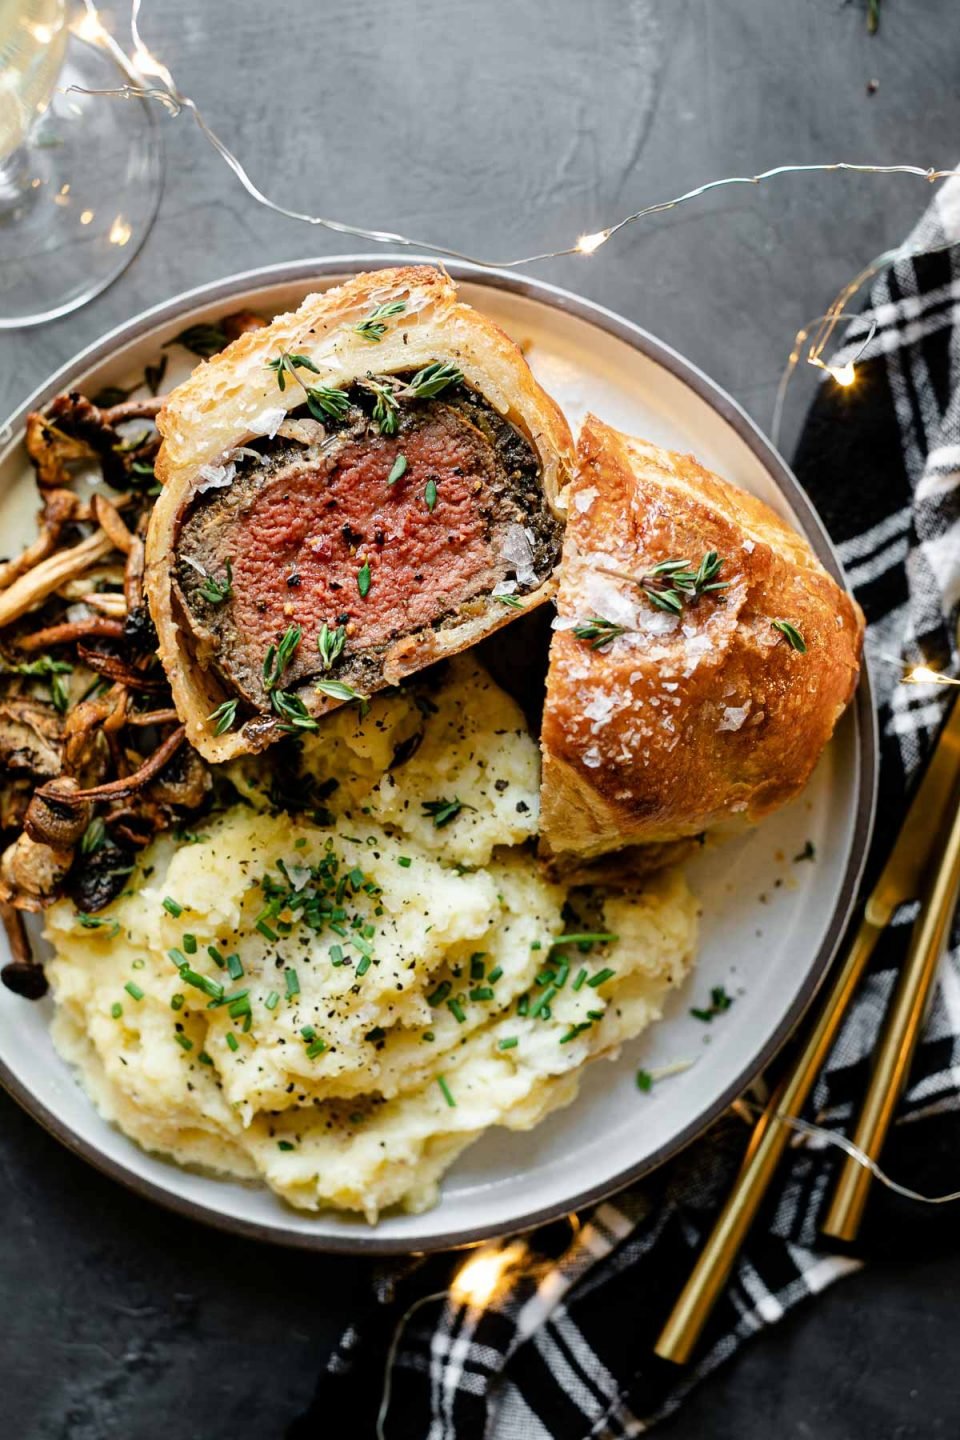 Individual Beef Wellington, cut in half, one half facing up. The beef wellington is on a white ceramic plate, served with mashed potatoes & roasted mushrooms. The plate is on a black surface, next to a black plaid linen napkin, gold flatware, a glass of wine & twinkly lights.